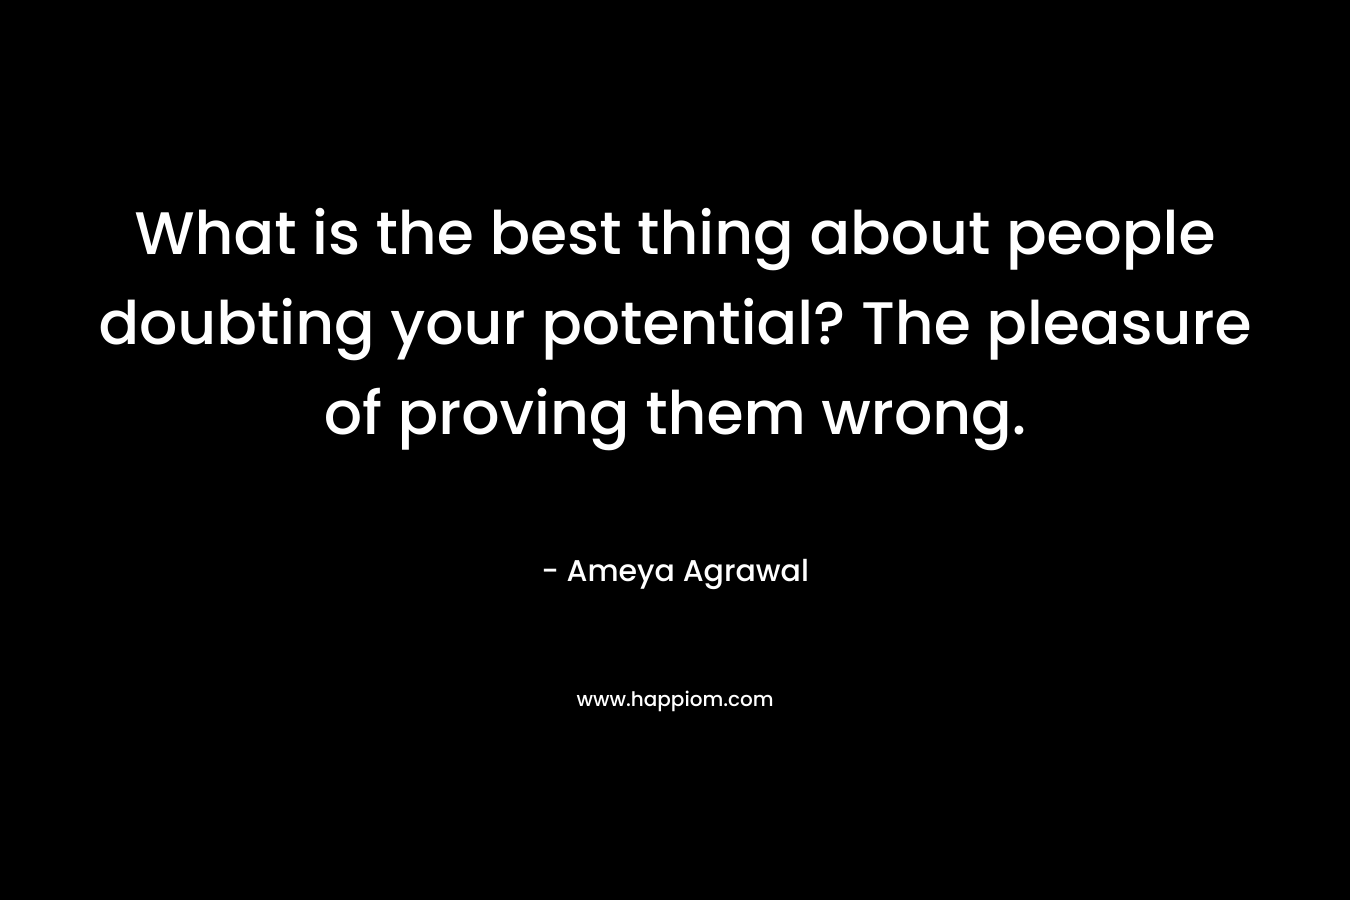 What is the best thing about people doubting your potential? The pleasure of proving them wrong. – Ameya Agrawal